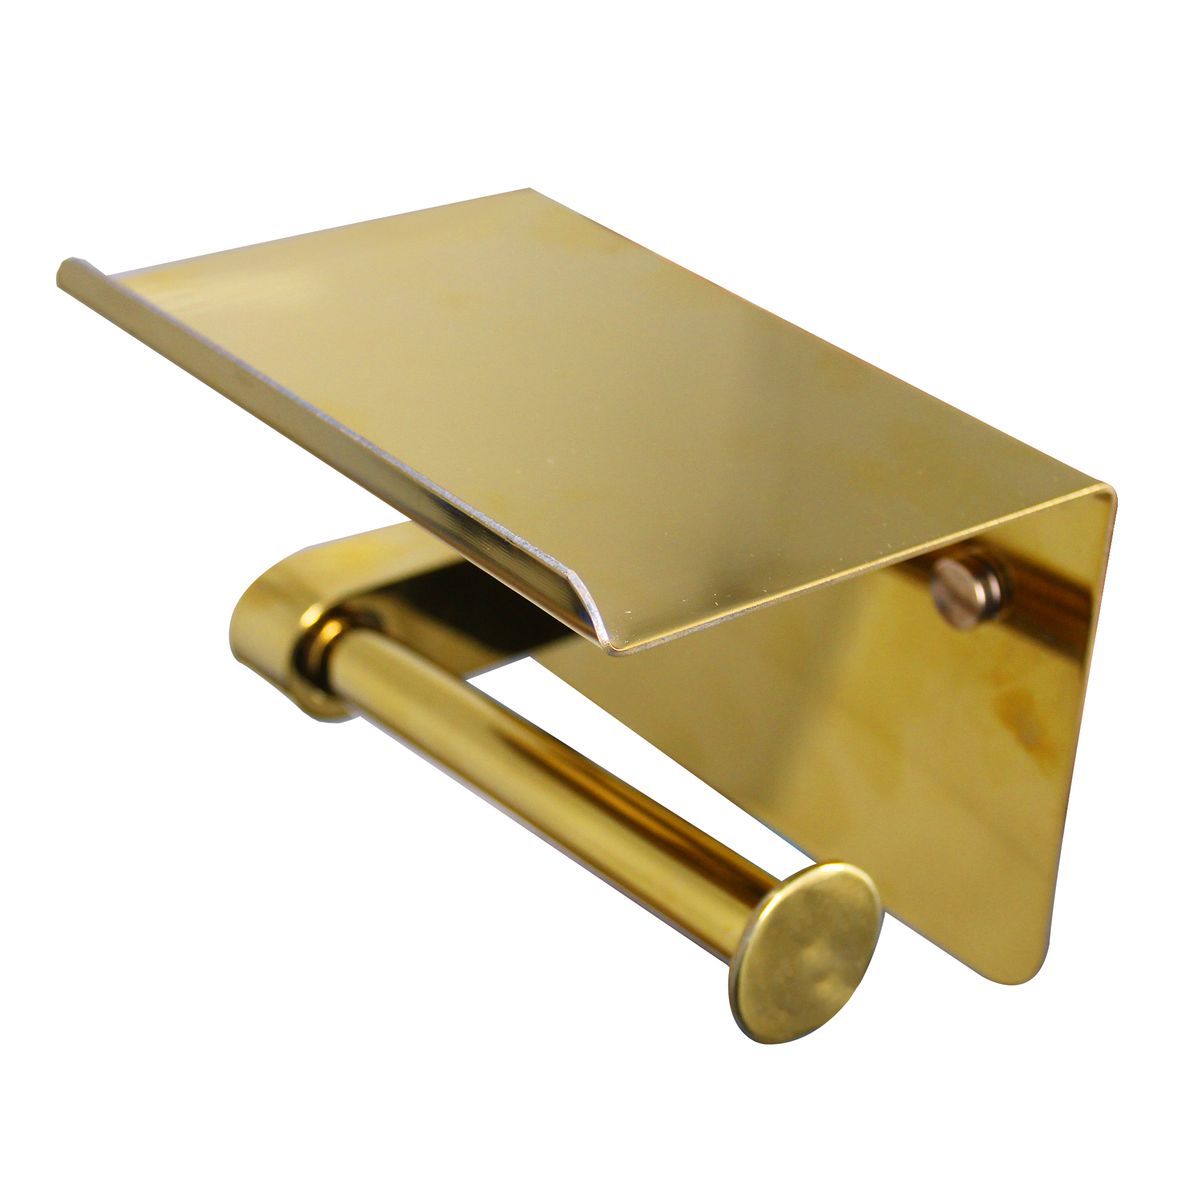 Stainless Steel 1 Roll Toilet Paper Holder with Cellphone Tray